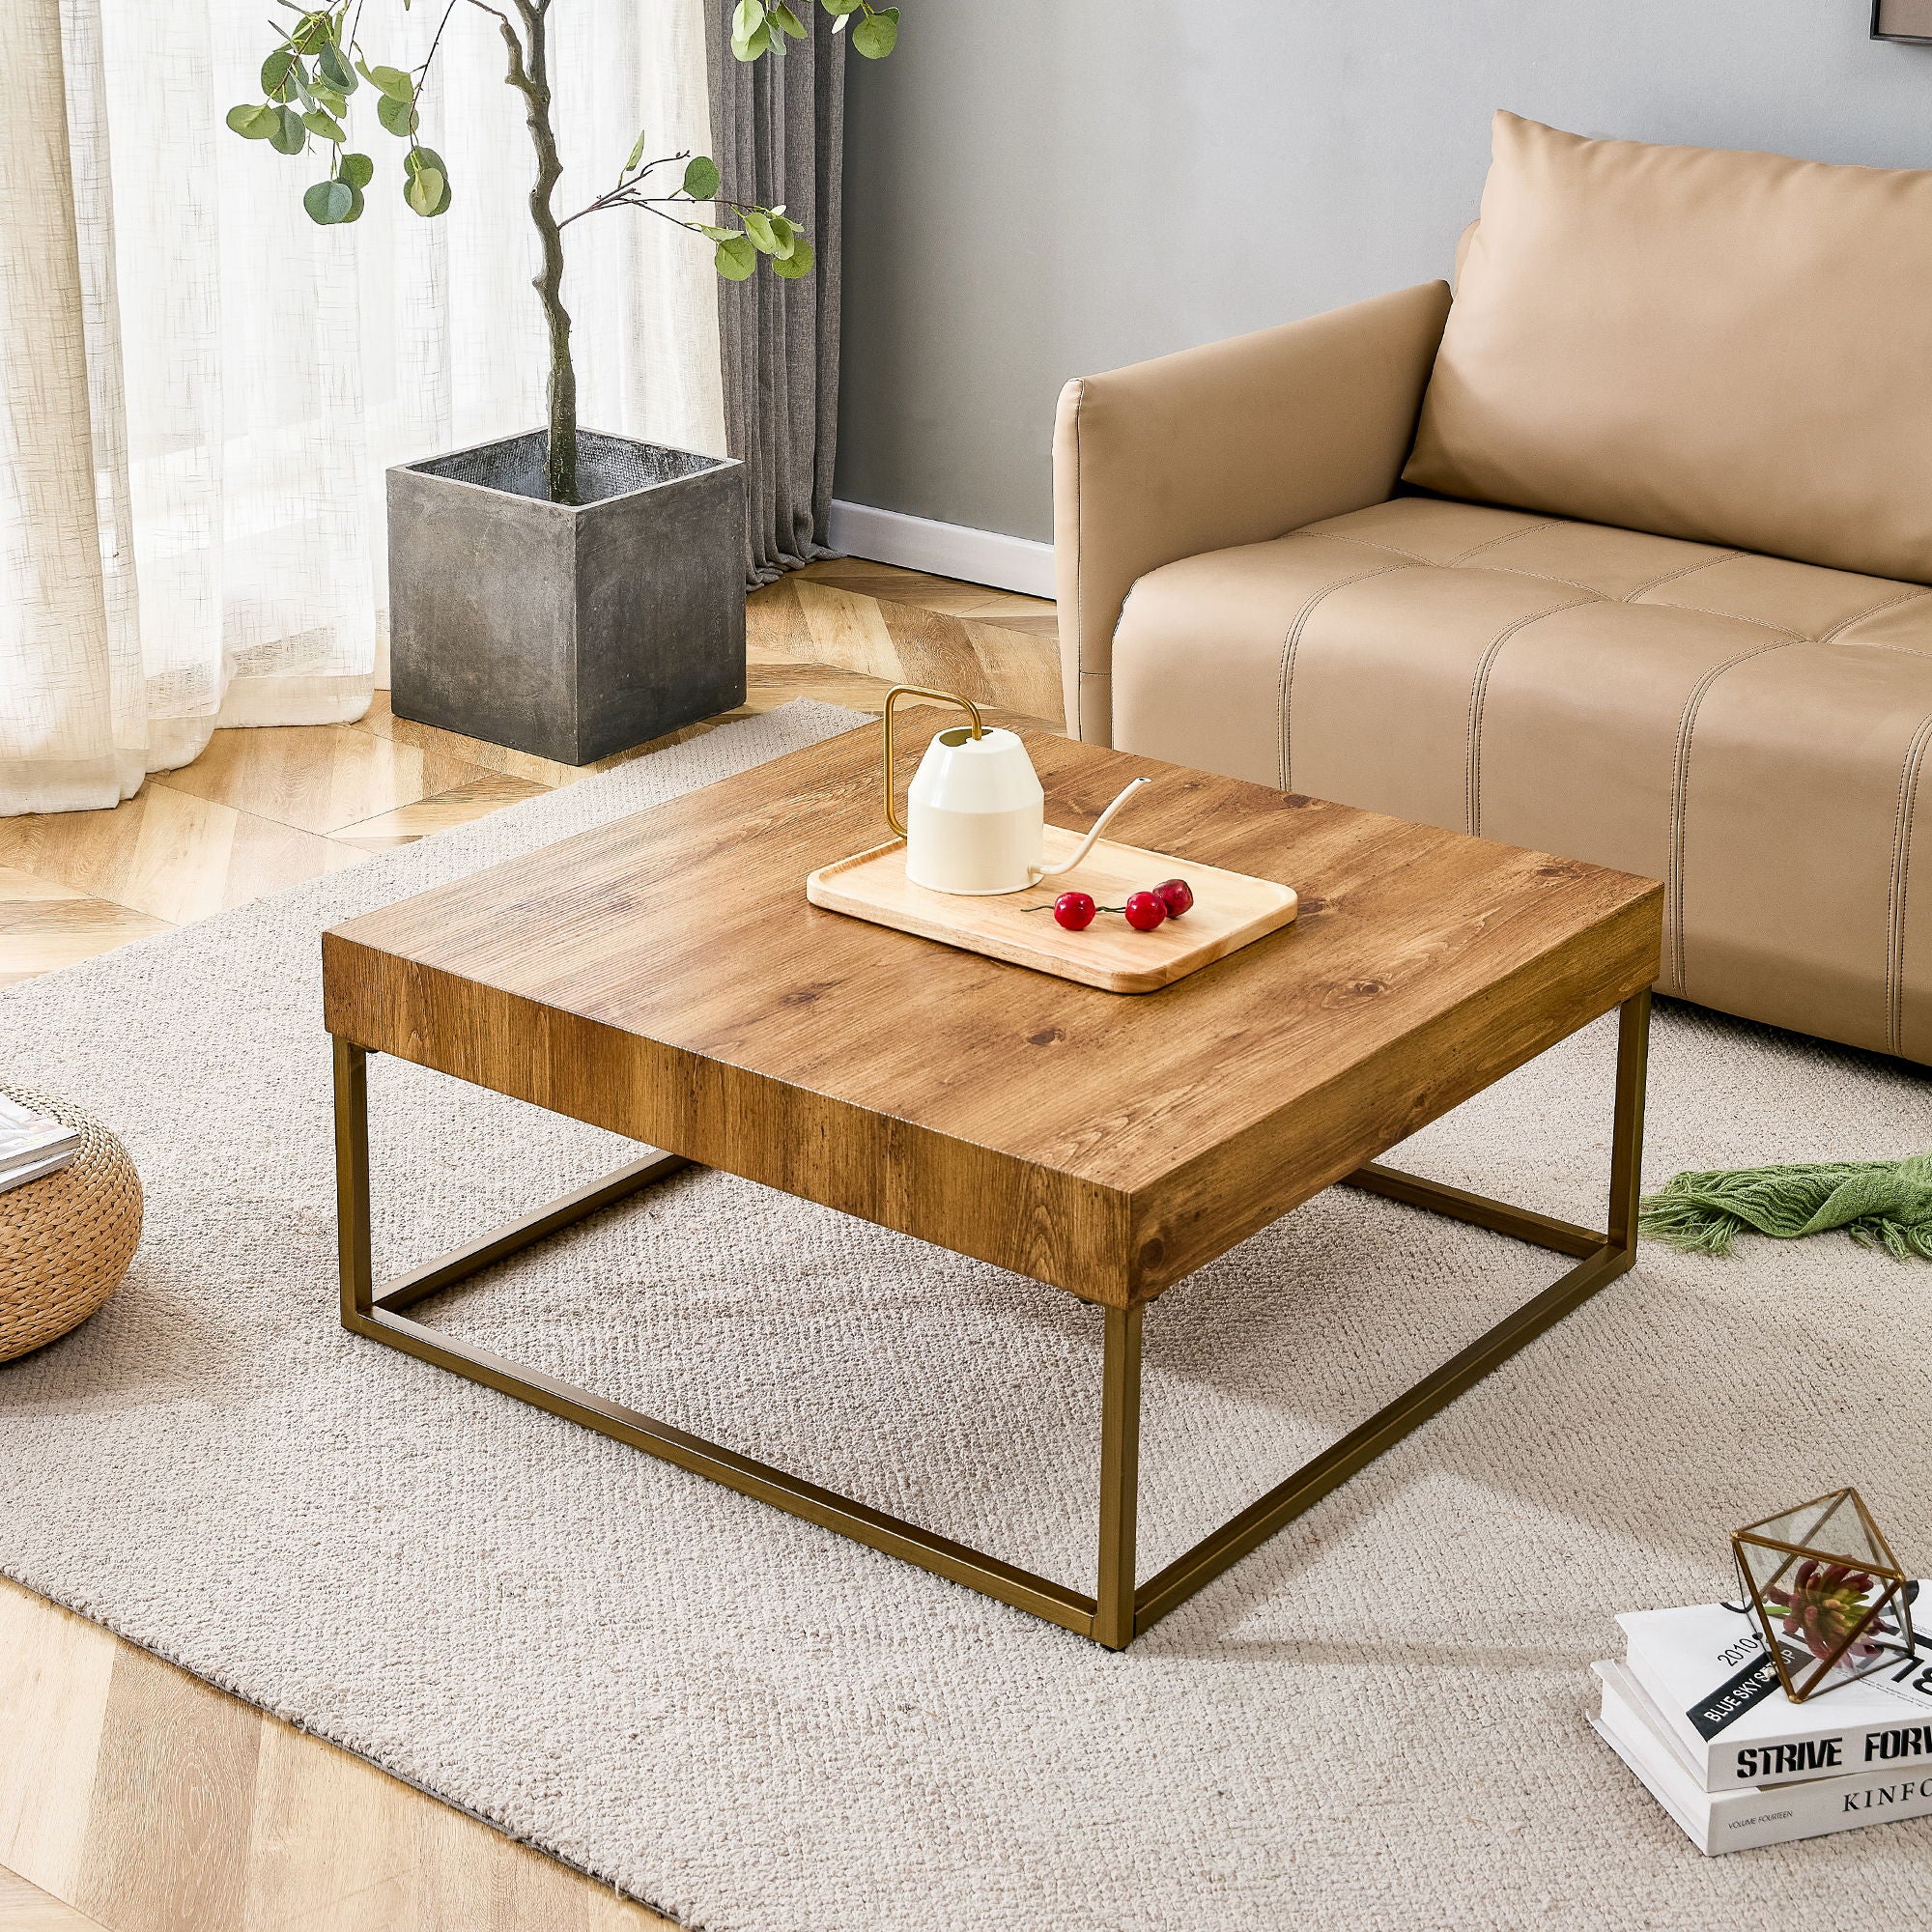 Modern Rectangular Coffee Table, Dining Table, MDF Desktop With Metal Legs, Suitable For Restaurants And Living Rooms